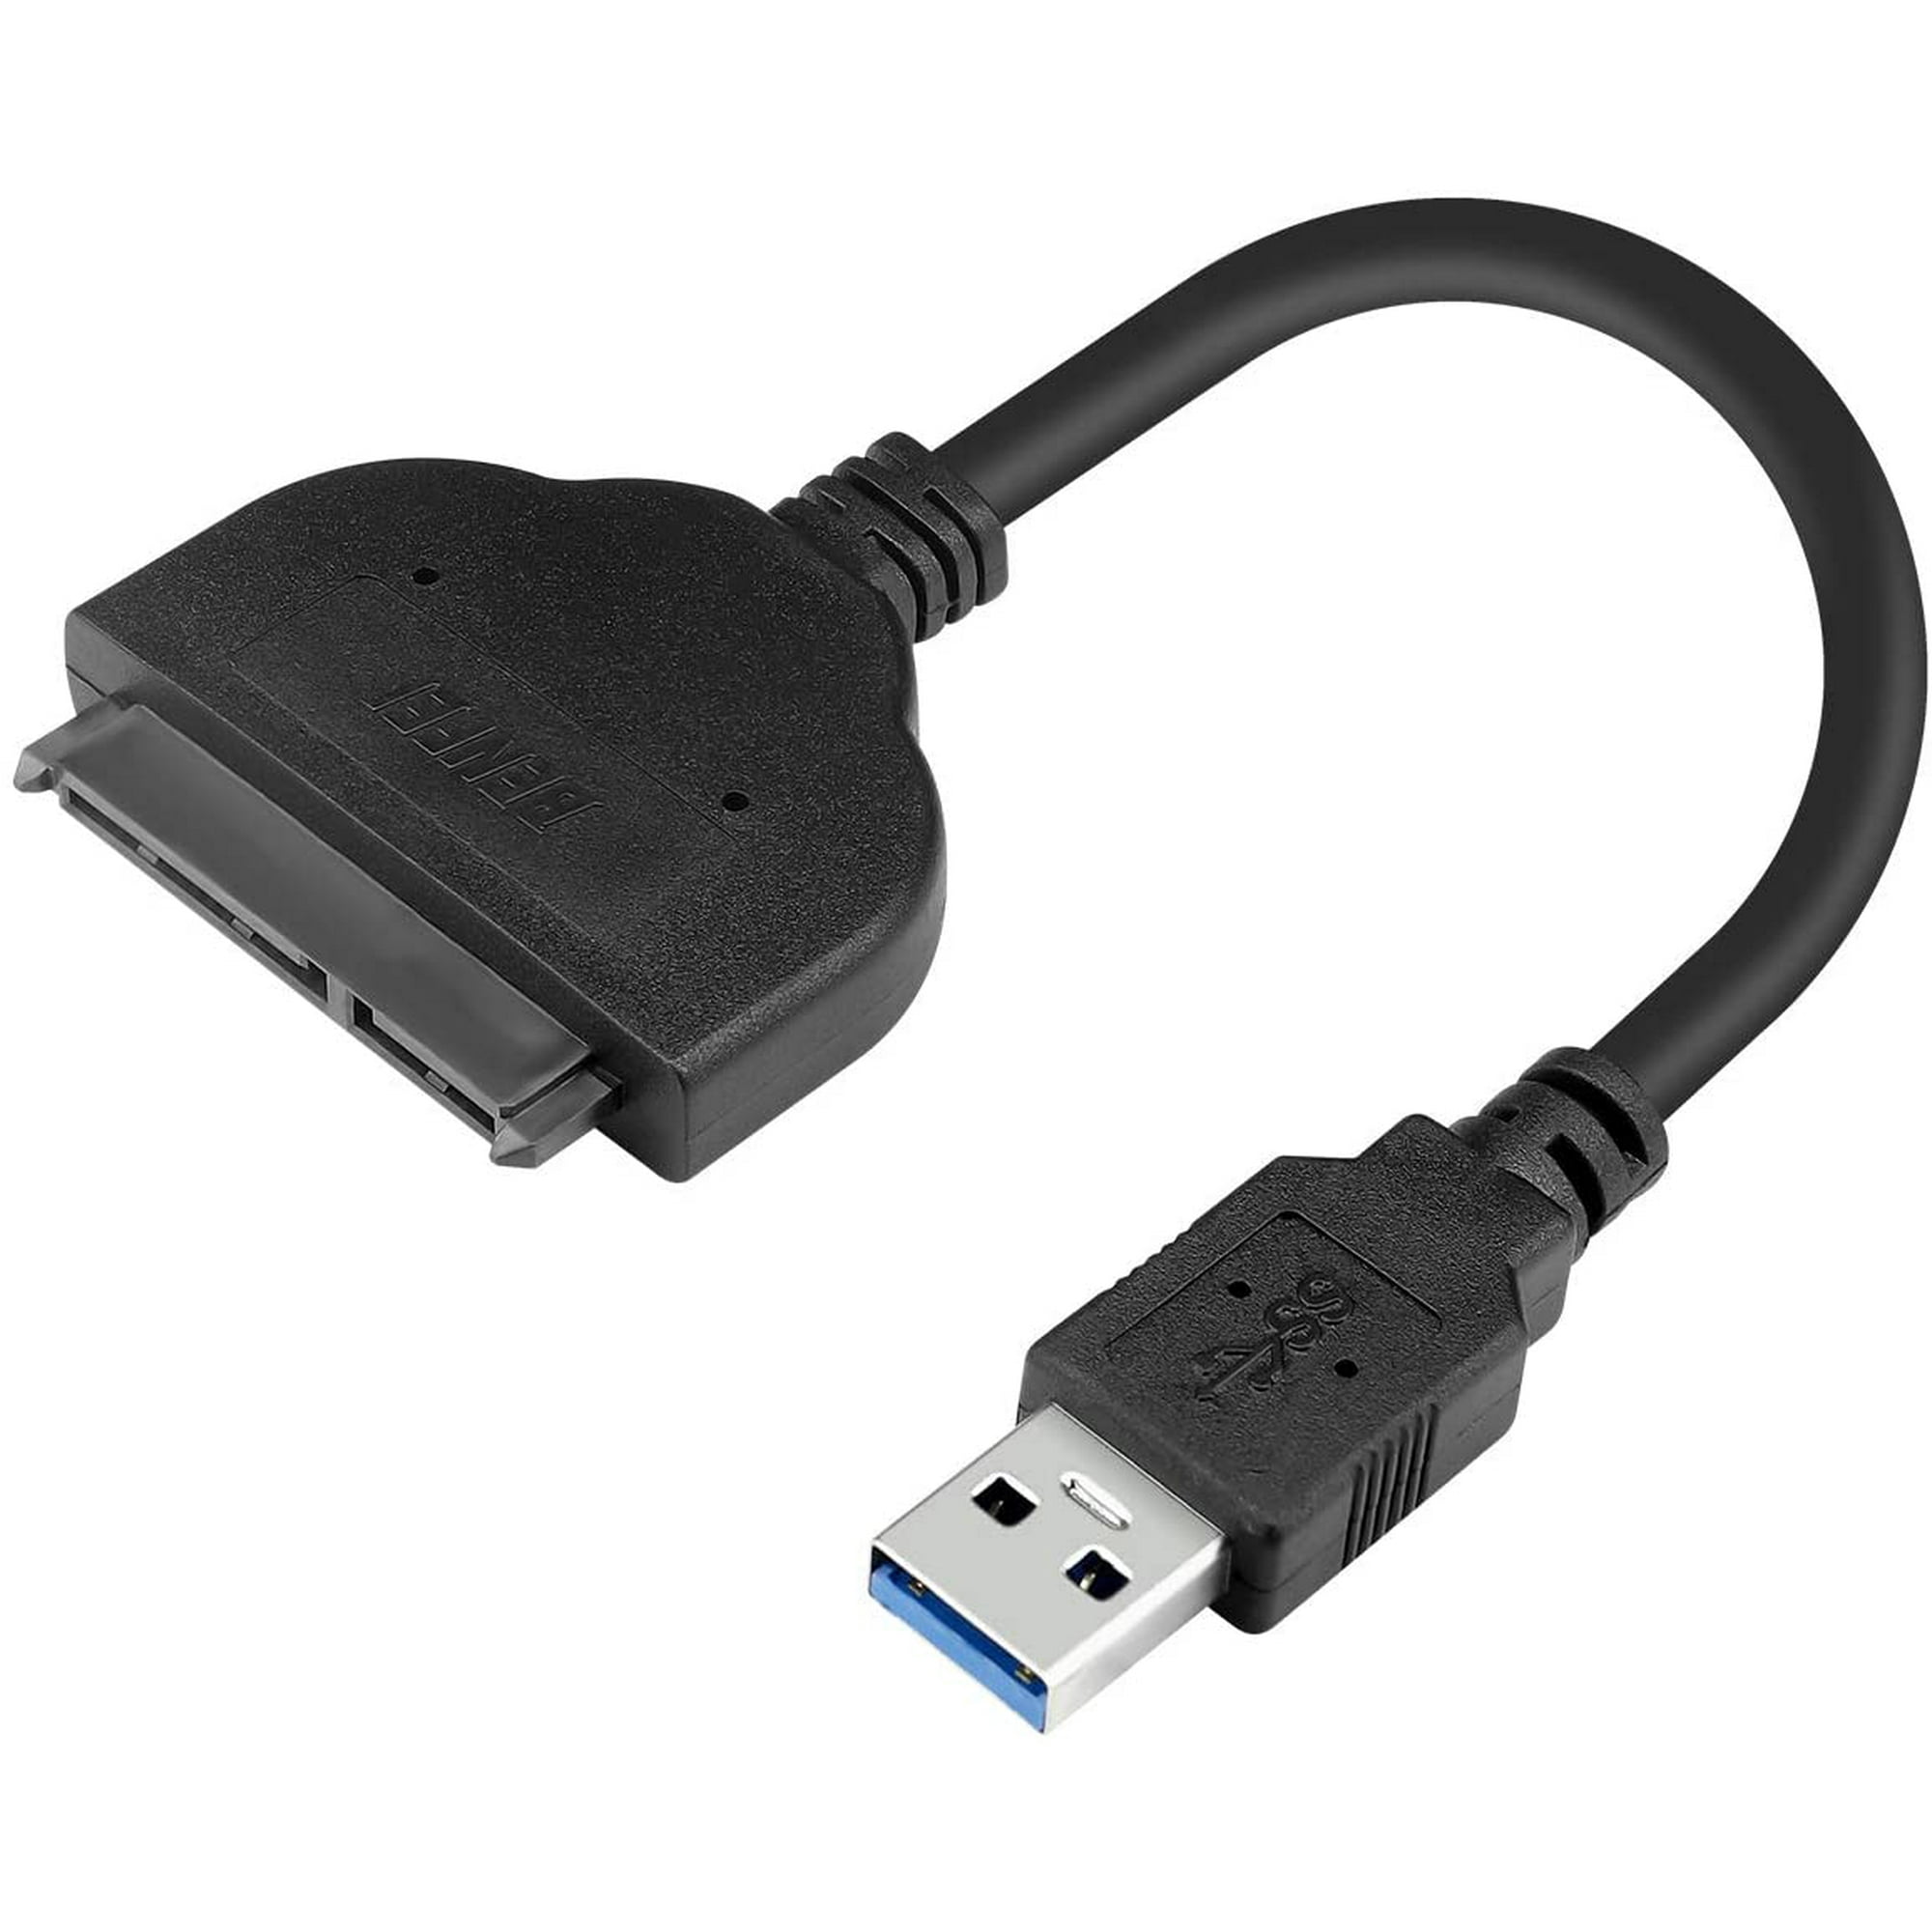 to USB Cable, Benfei USB 3.0 to SATA III Hard Driver Adapter w/UASP Compatible 2.5 inch HDD and SSD | Walmart Canada